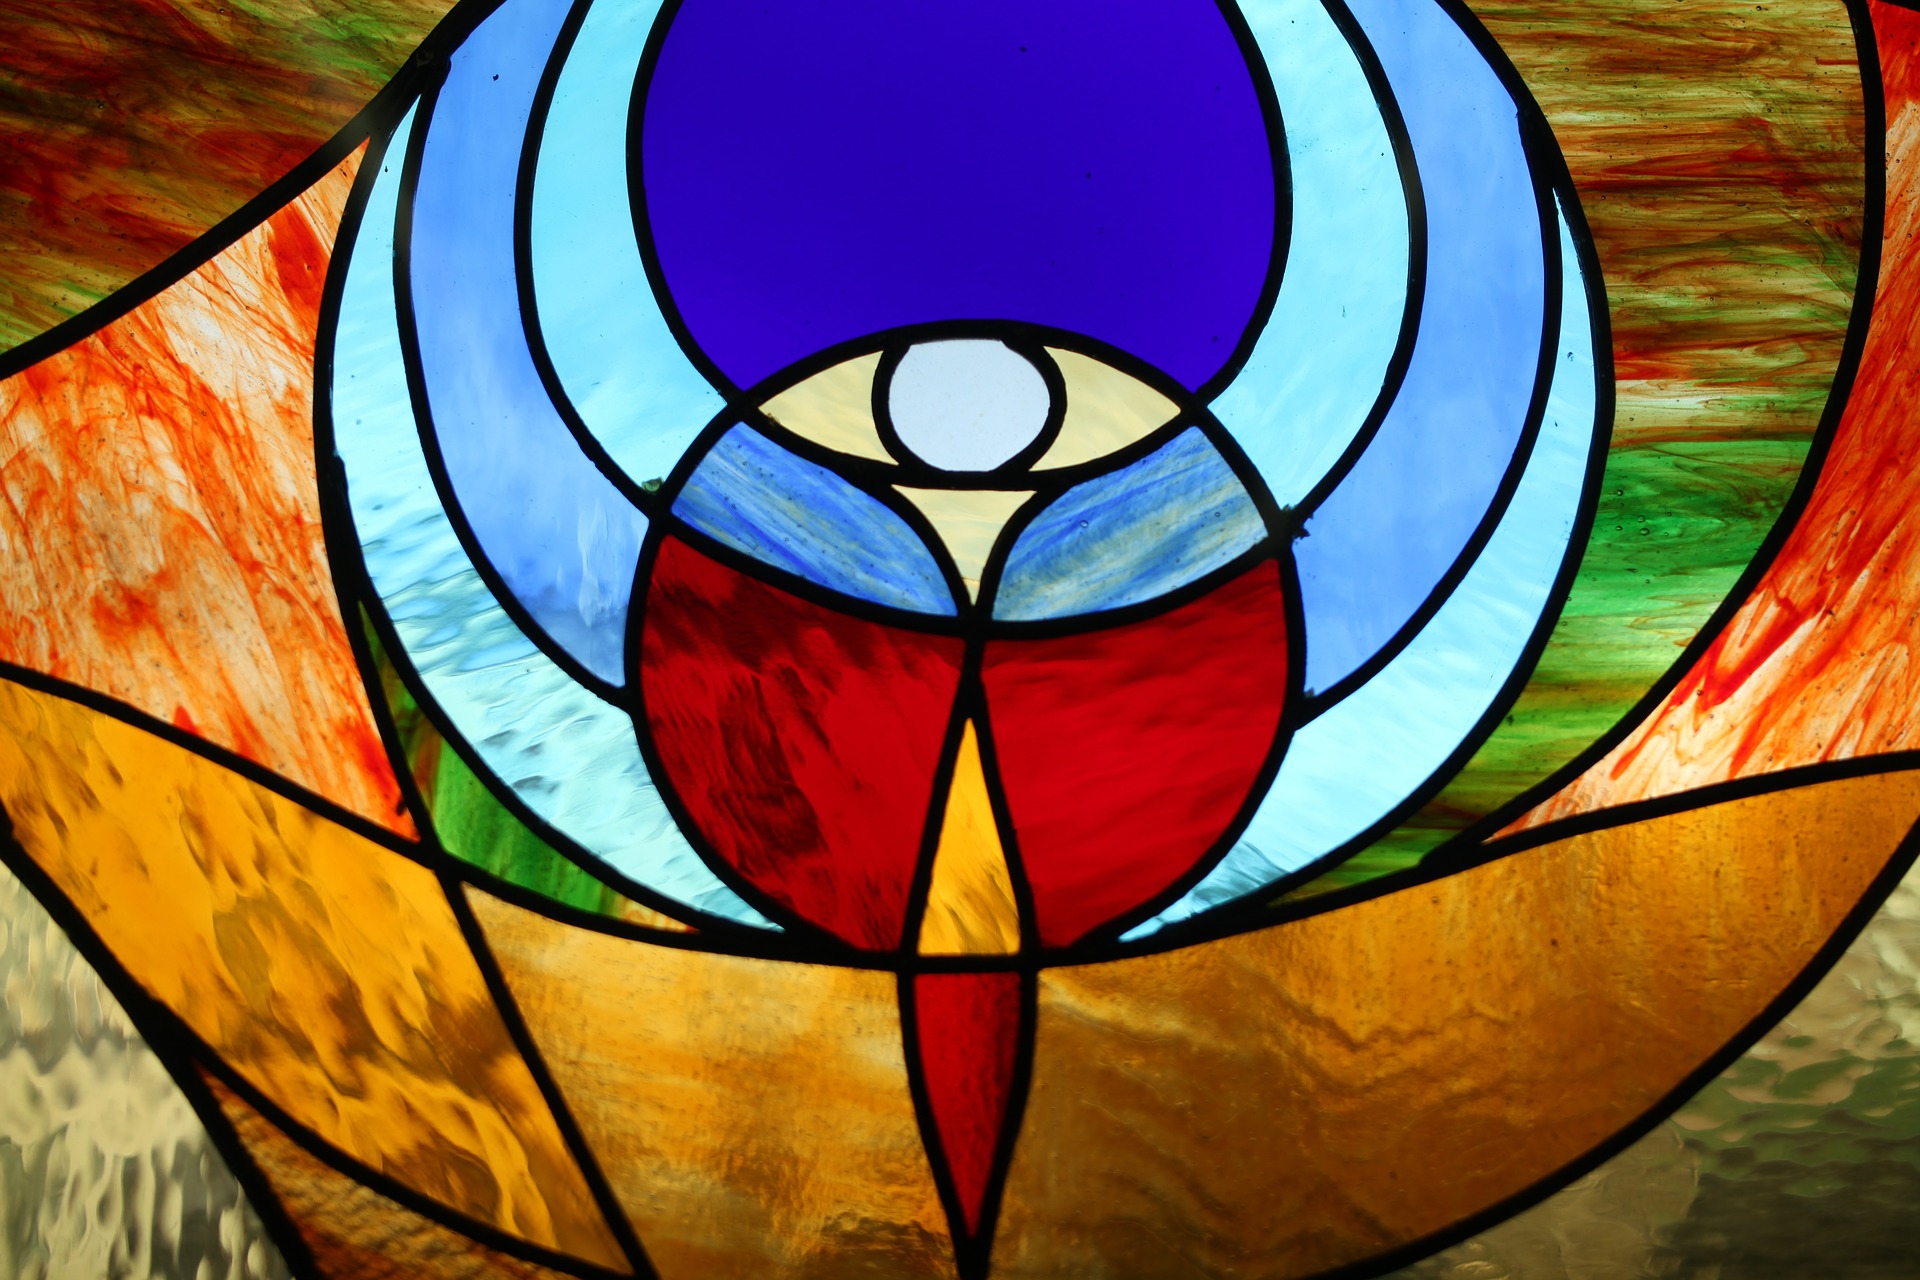 Modern stained glass window showing the Eucharist